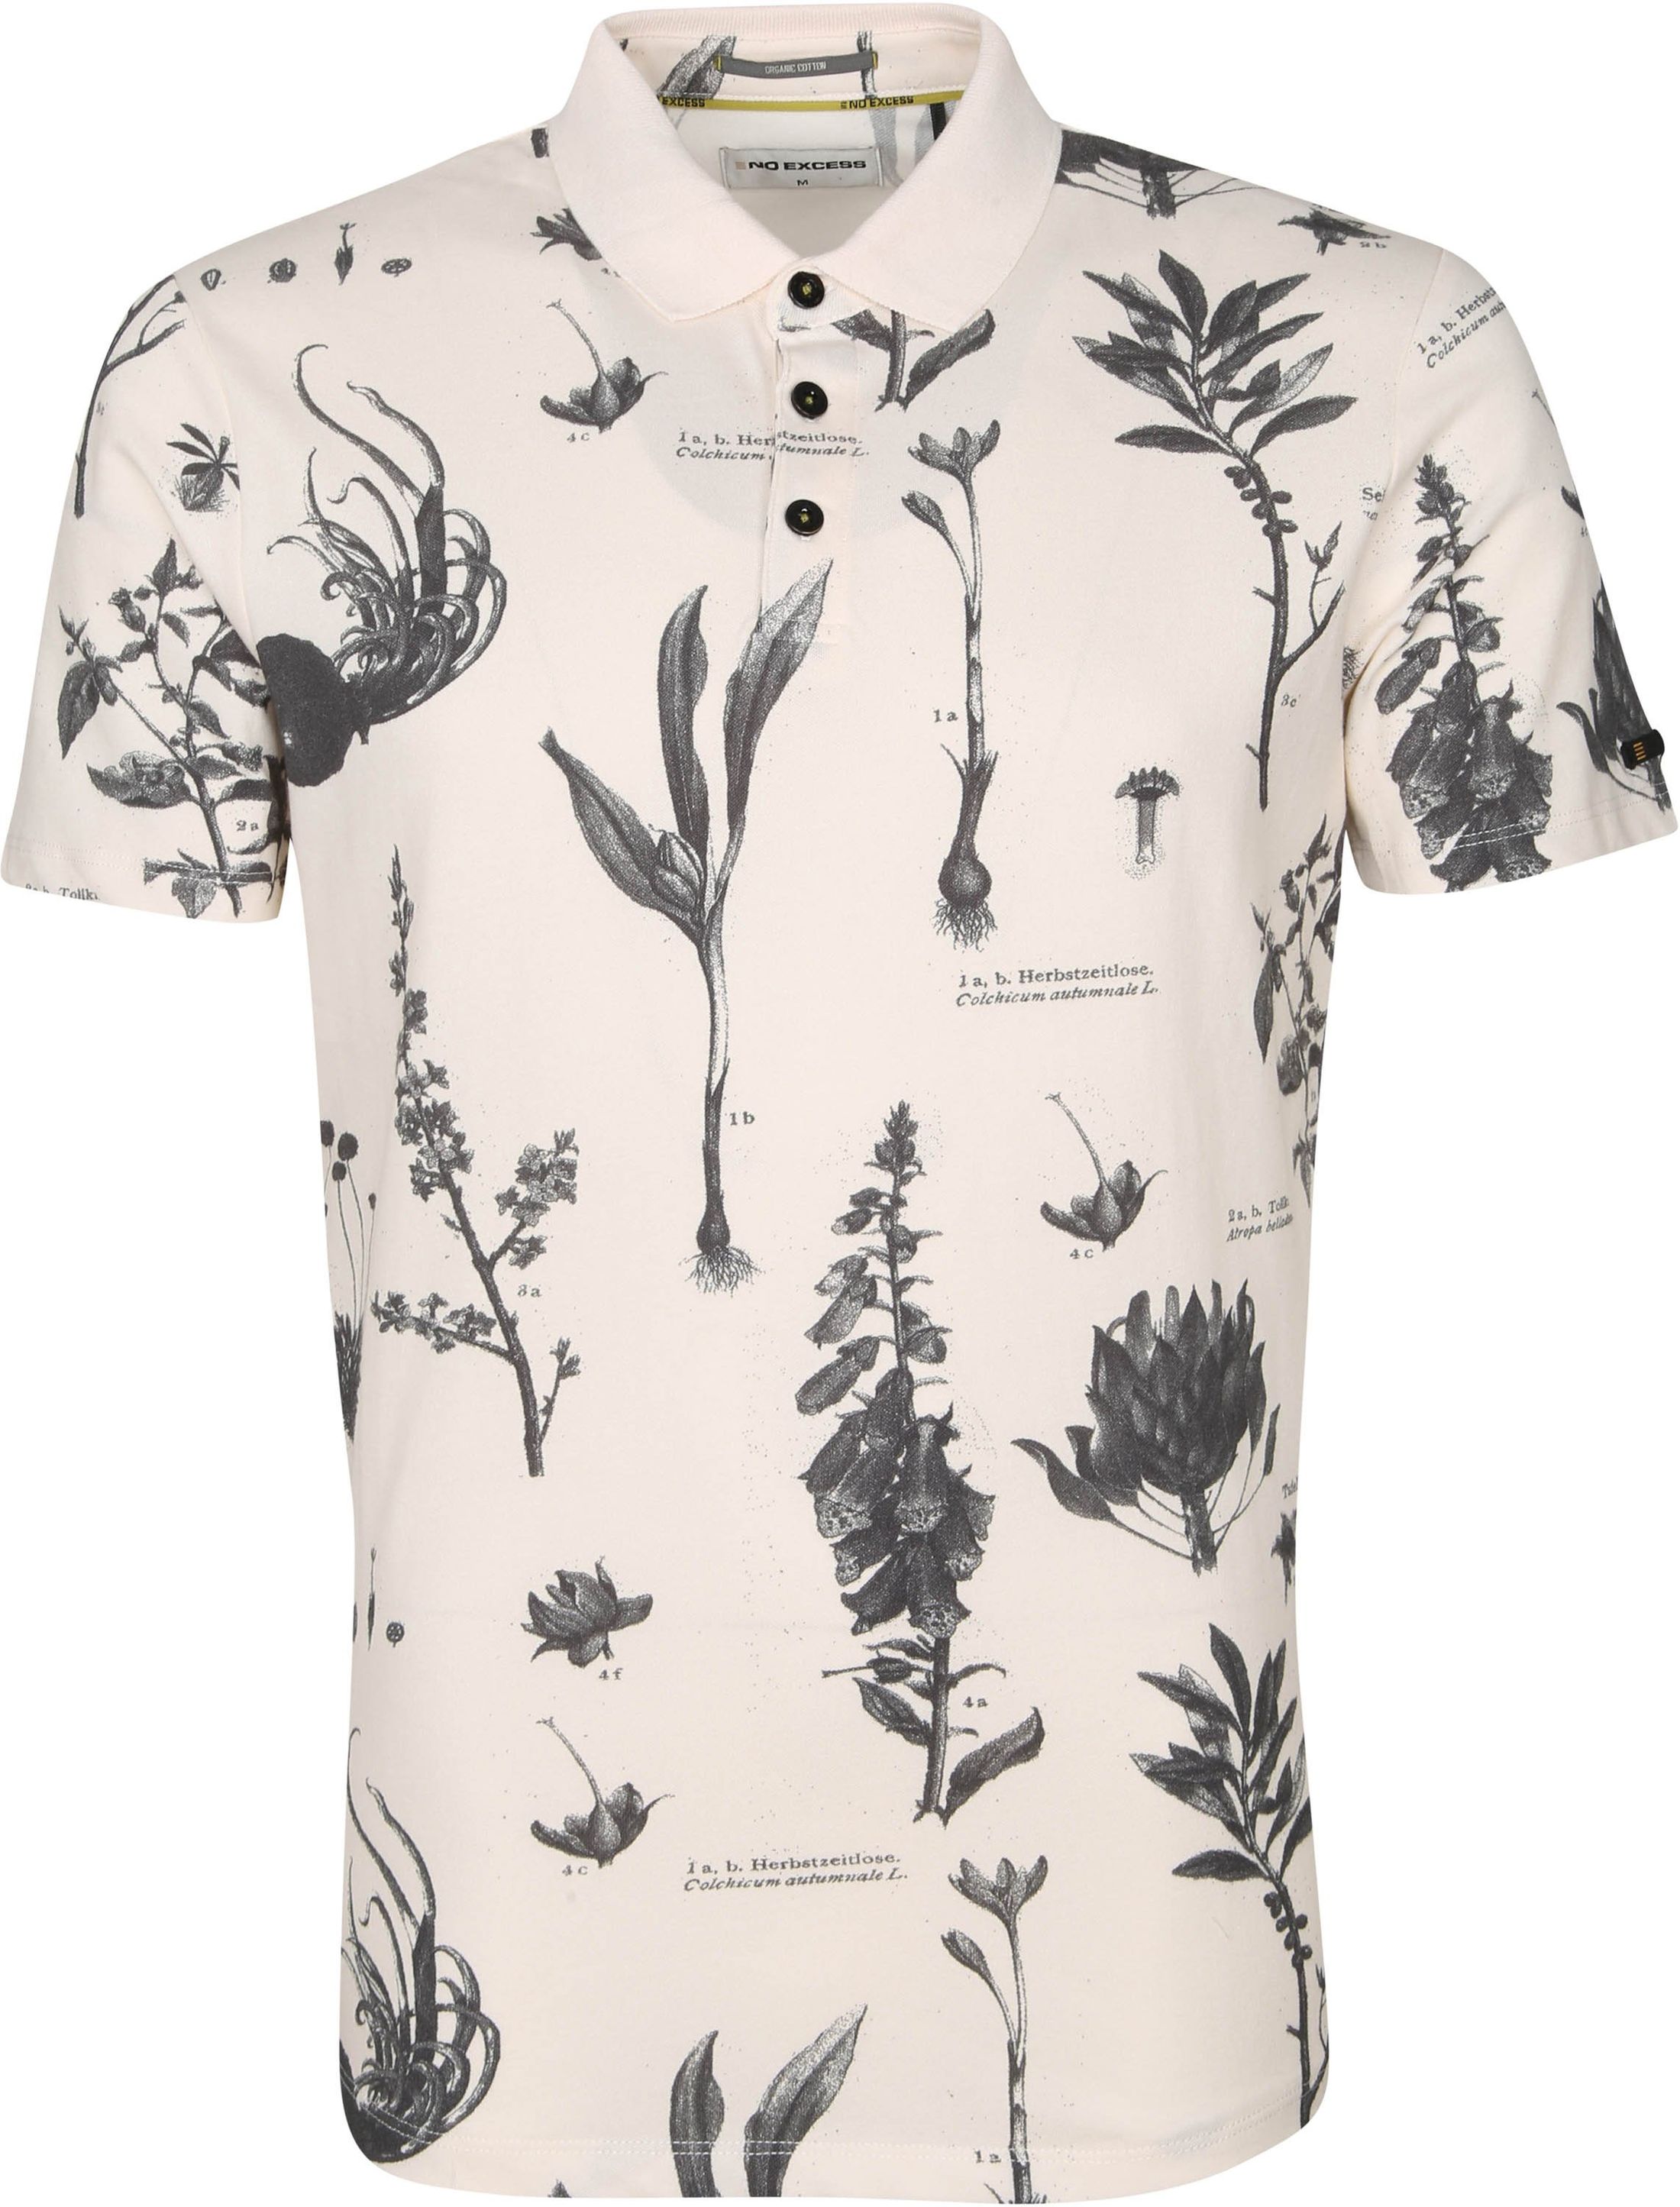 No-Excess Polo Shirt Pique Flowers Off White Off-White size L